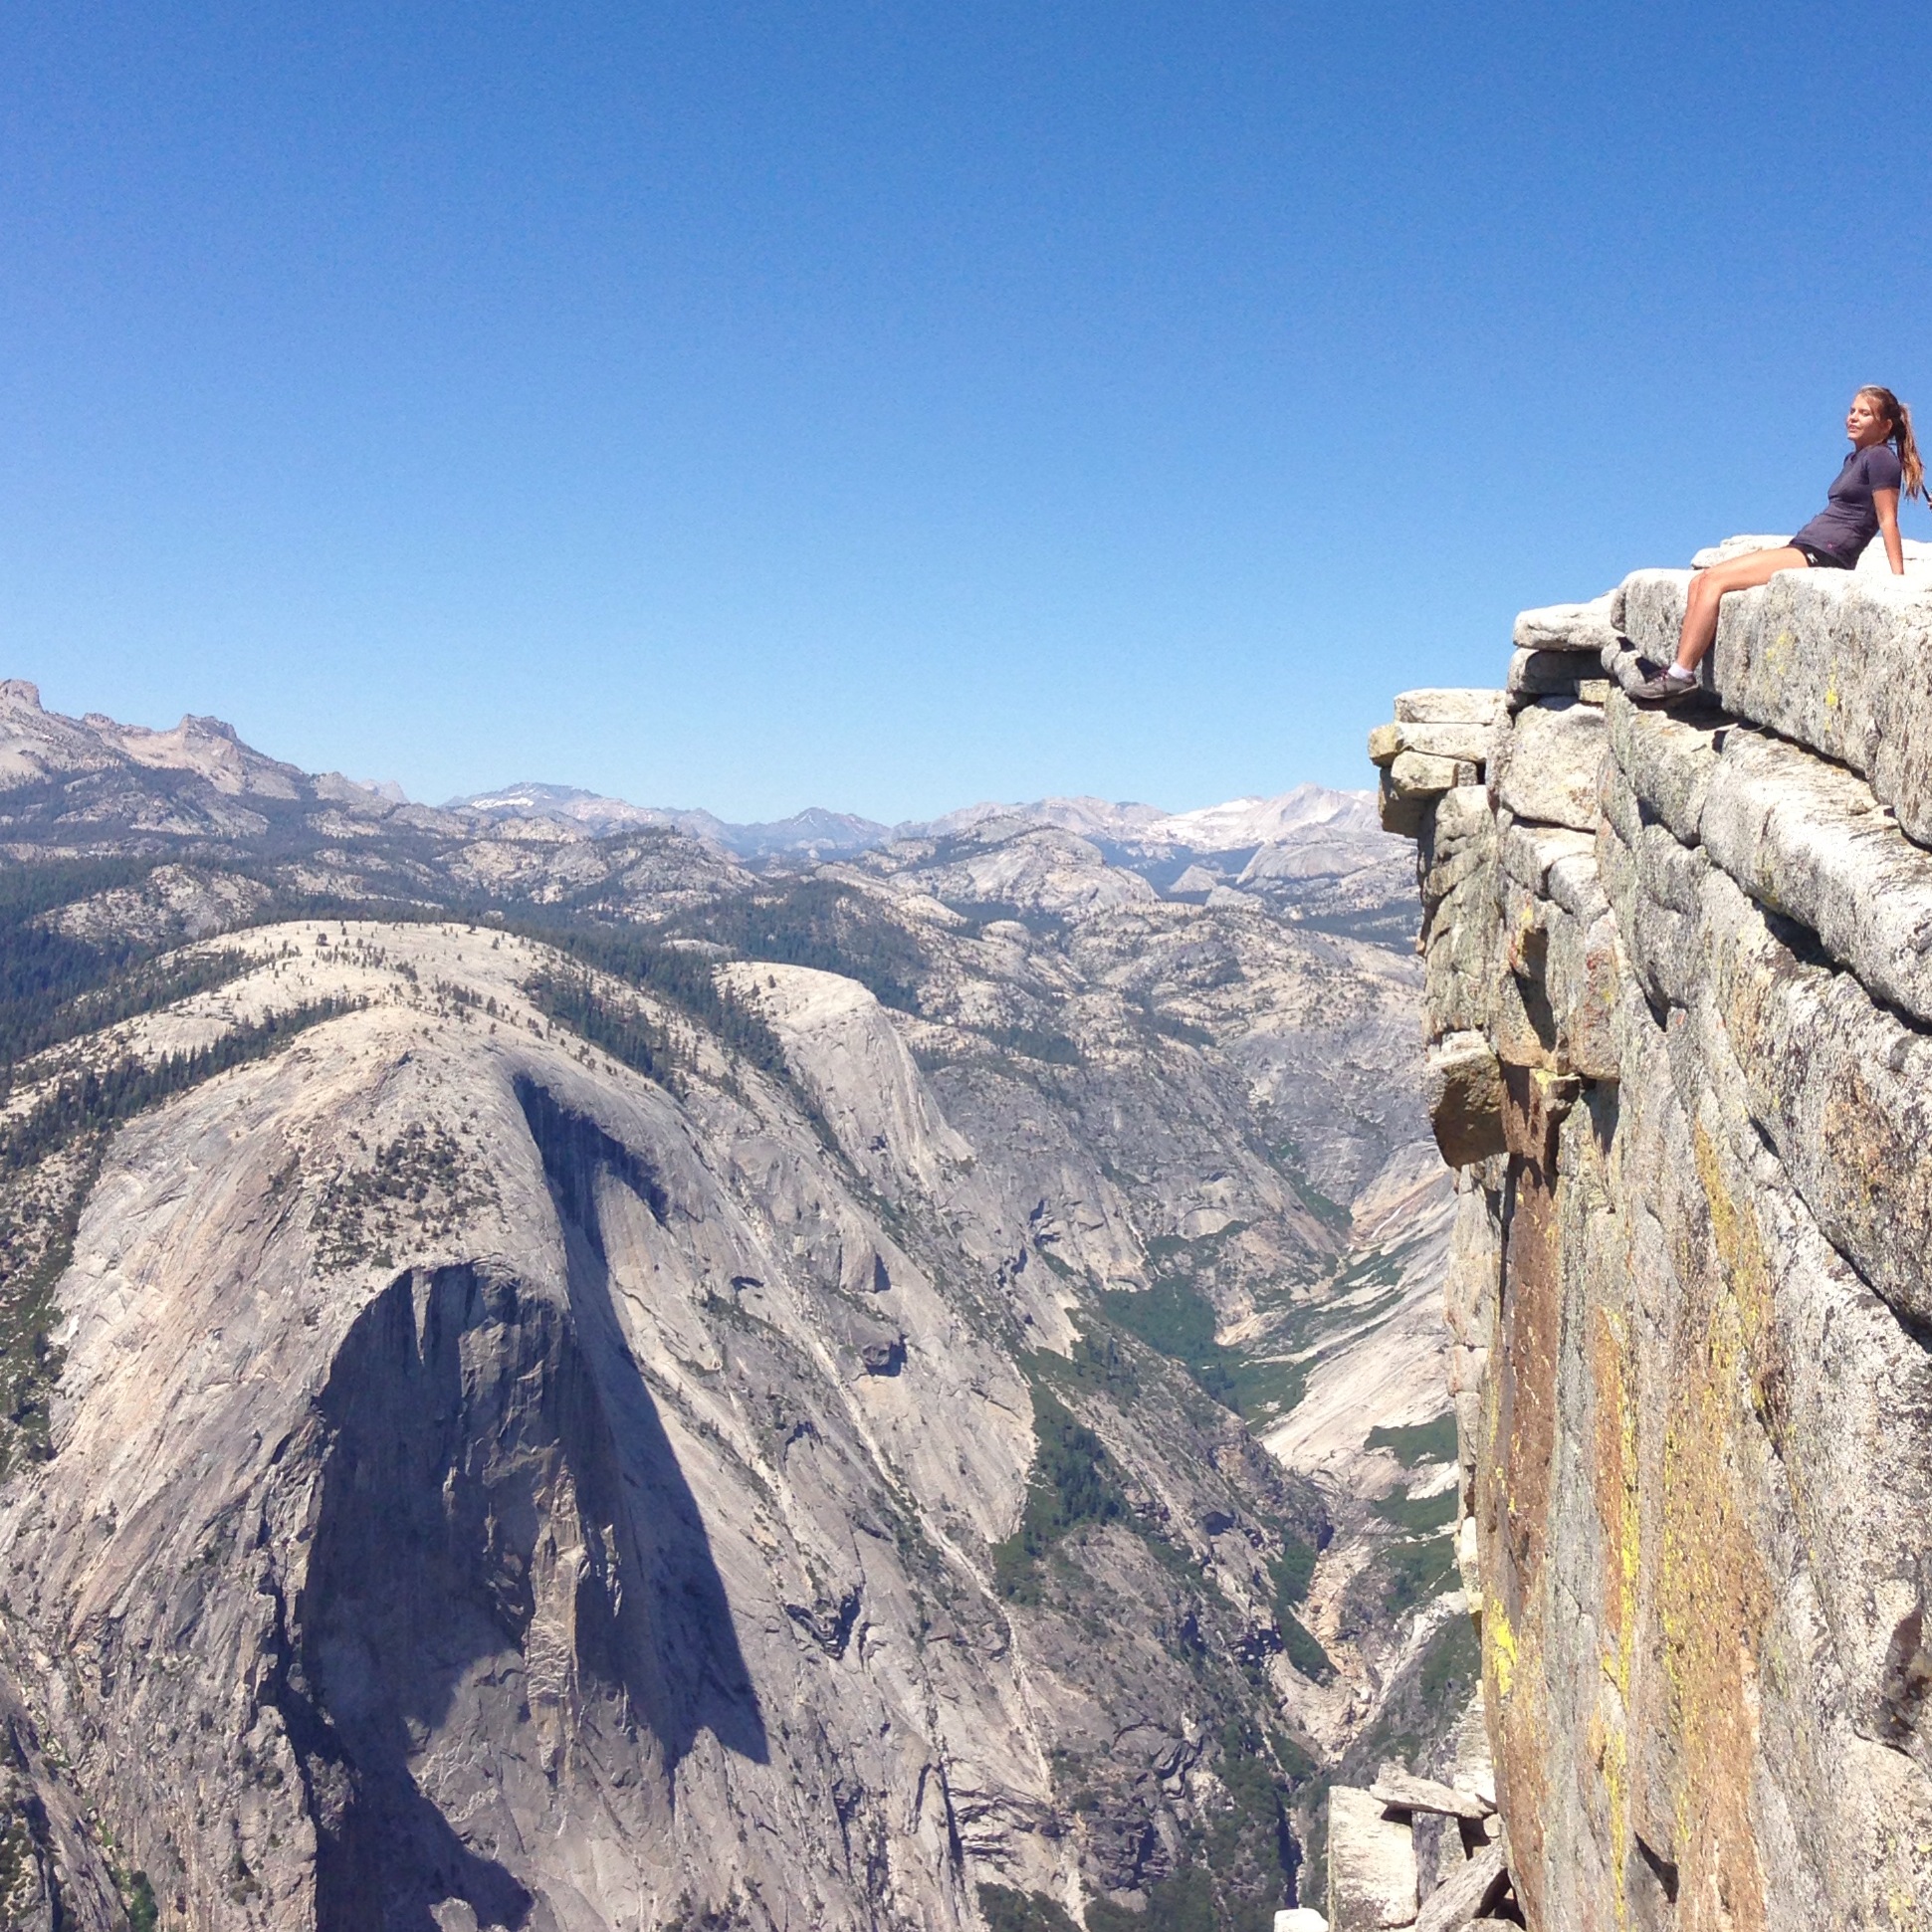 An Amateurs Guide to Hiking the Half Dome - Shalee Wanders Travel Blog